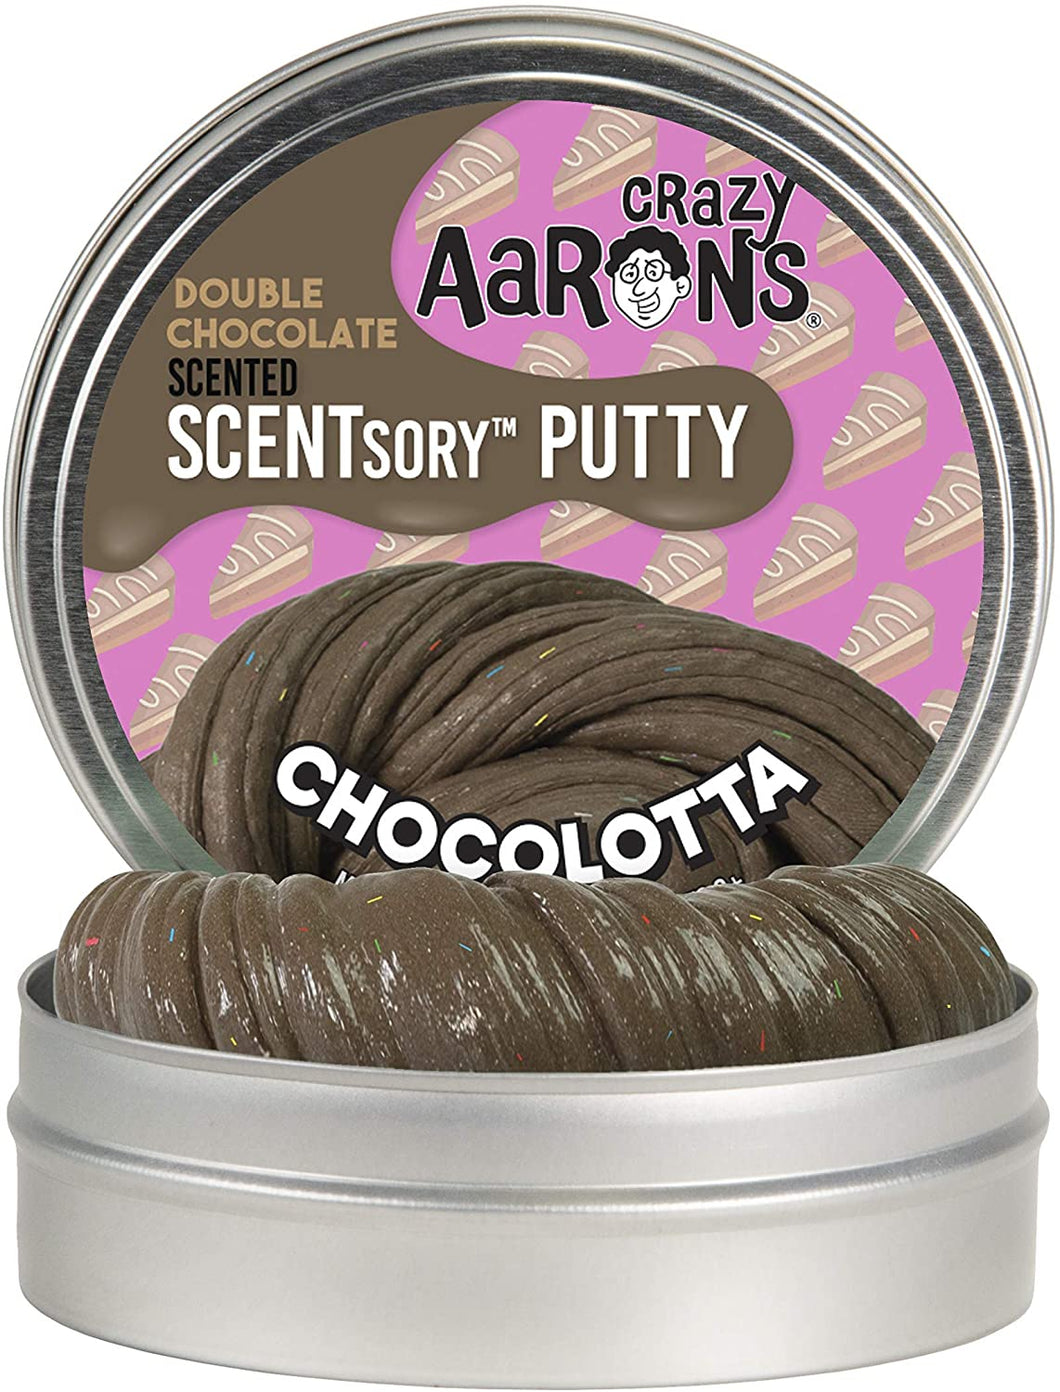 Crazy Aaron's Thinking Putty - Scentsory Treat: Chocolotta - Fidget Toy - Stretch, Play and Create -  Double Chocolate Scented Brown & Rainbow Color - Never Dries Out - 2.75